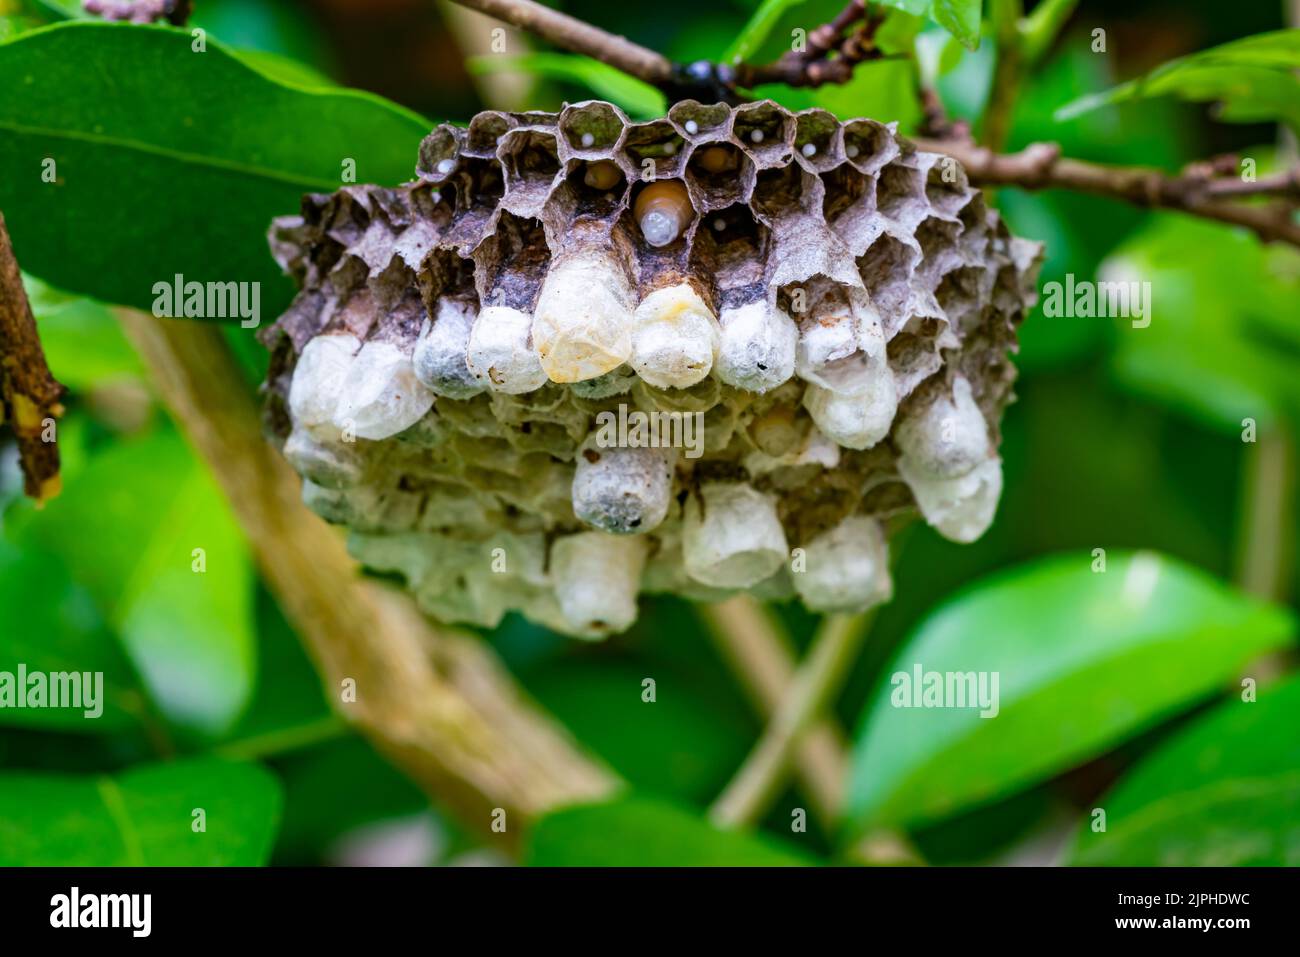 Low angle view of wasp nest with eggs and growing larva hanging on branches of a tree. Stock Photo